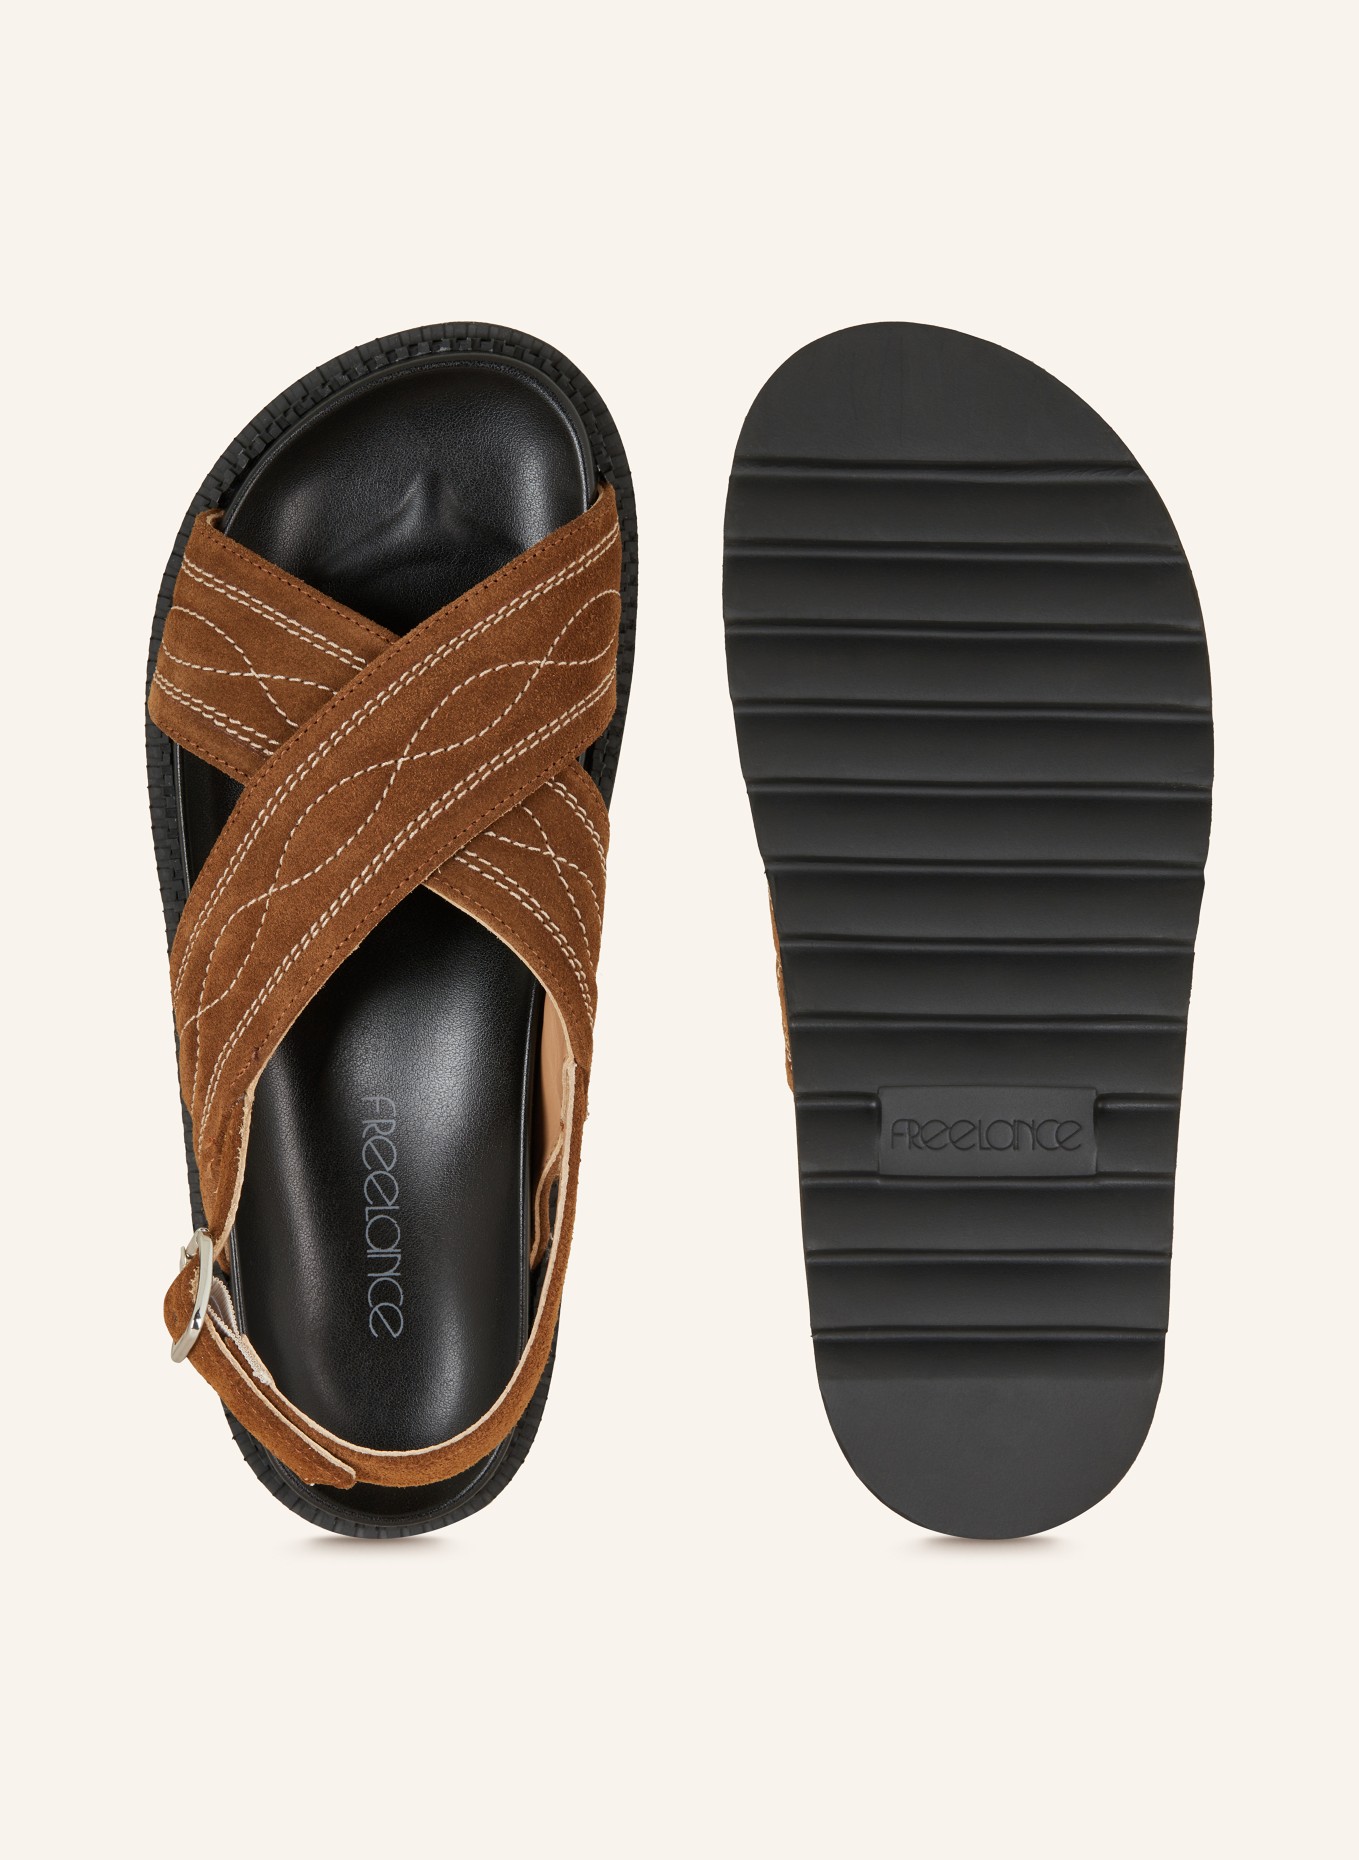 FREE LANCE Sandals TRINITY, Color: BROWN (Image 5)